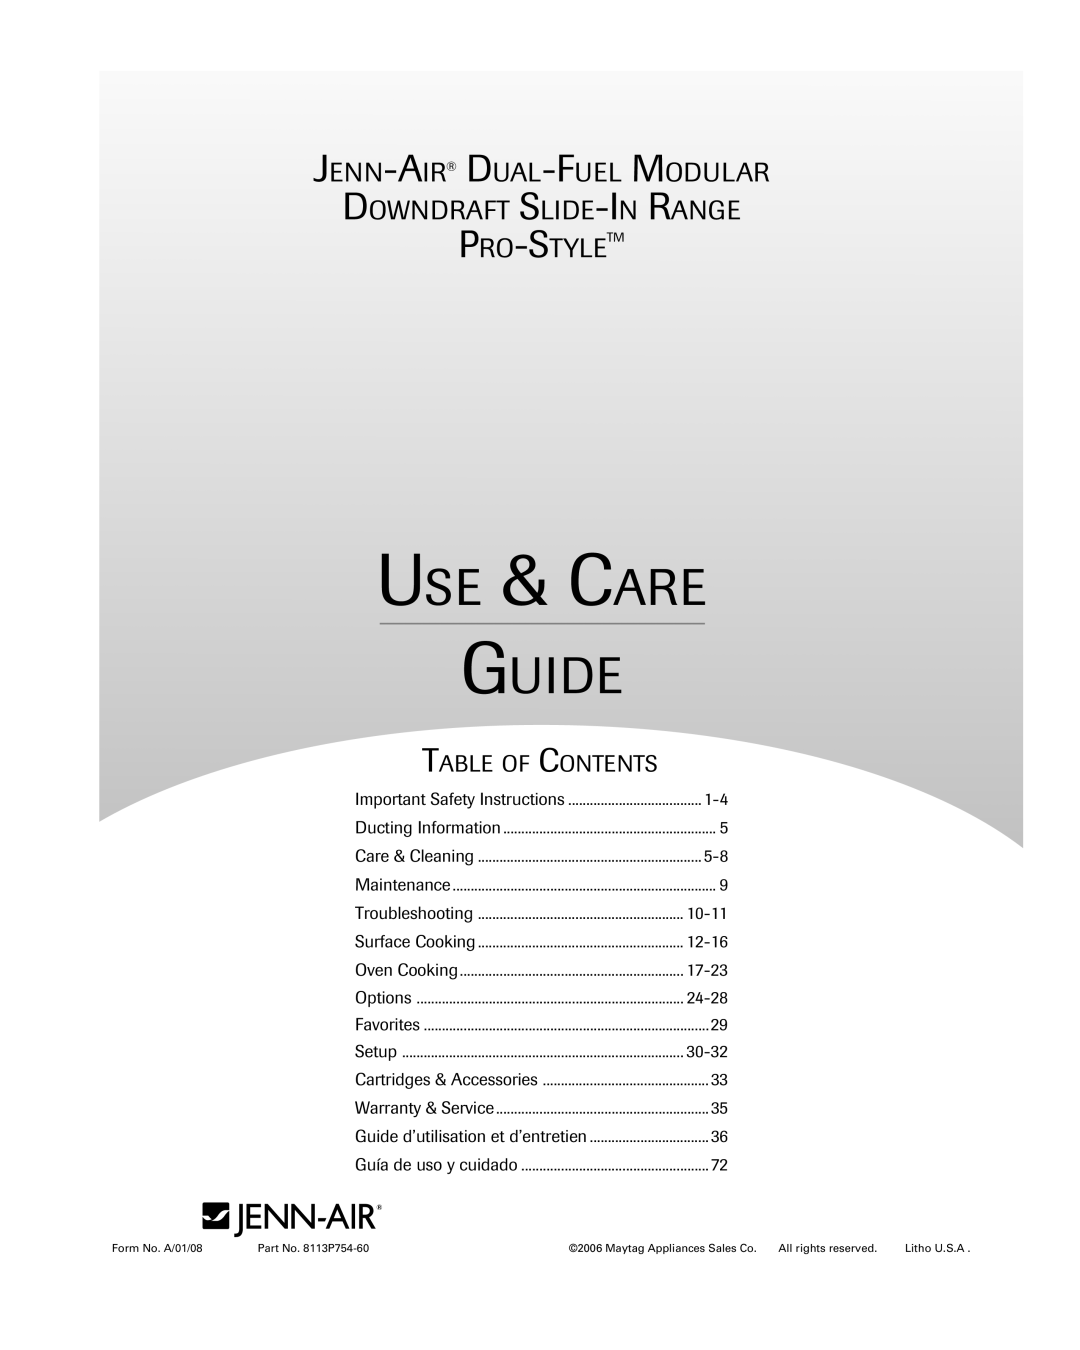 Jenn-Air 8113P754-60 important safety instructions Use & Care Guide, Table Of Contents, Maintenance, Favorites 